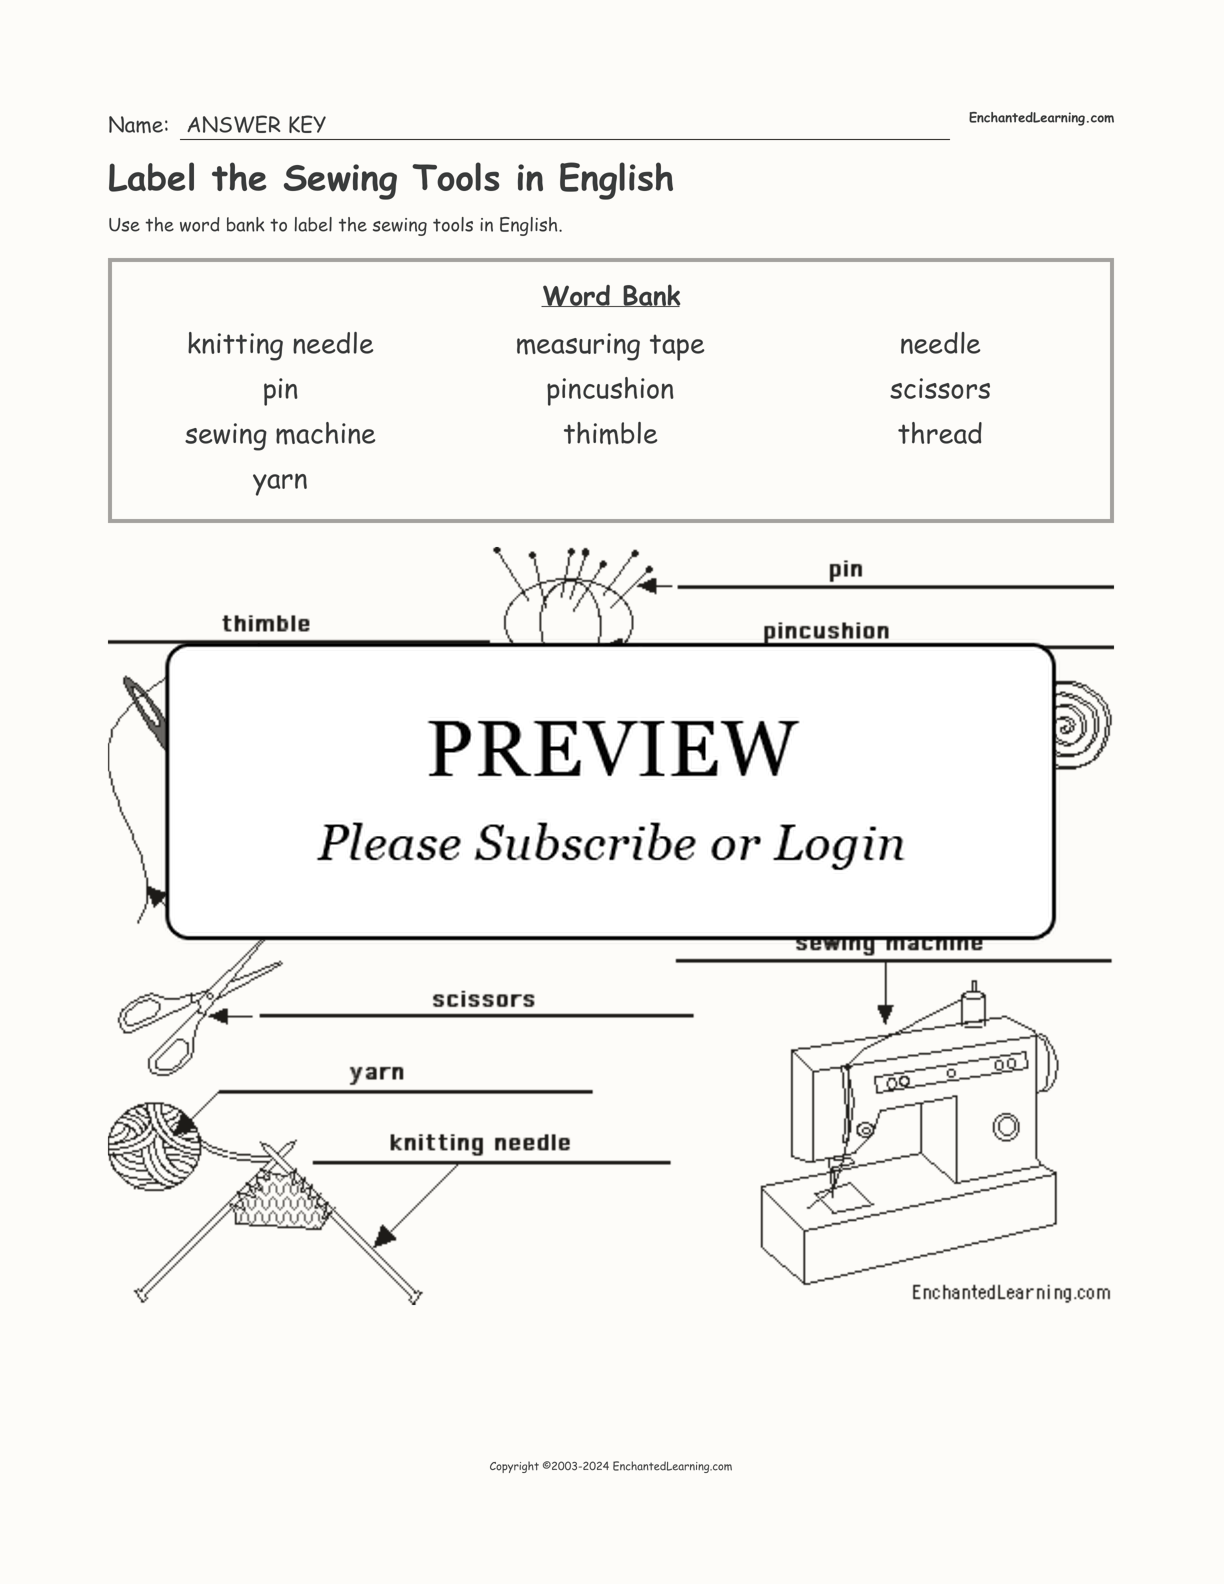 Label the Sewing Tools in English interactive worksheet page 2